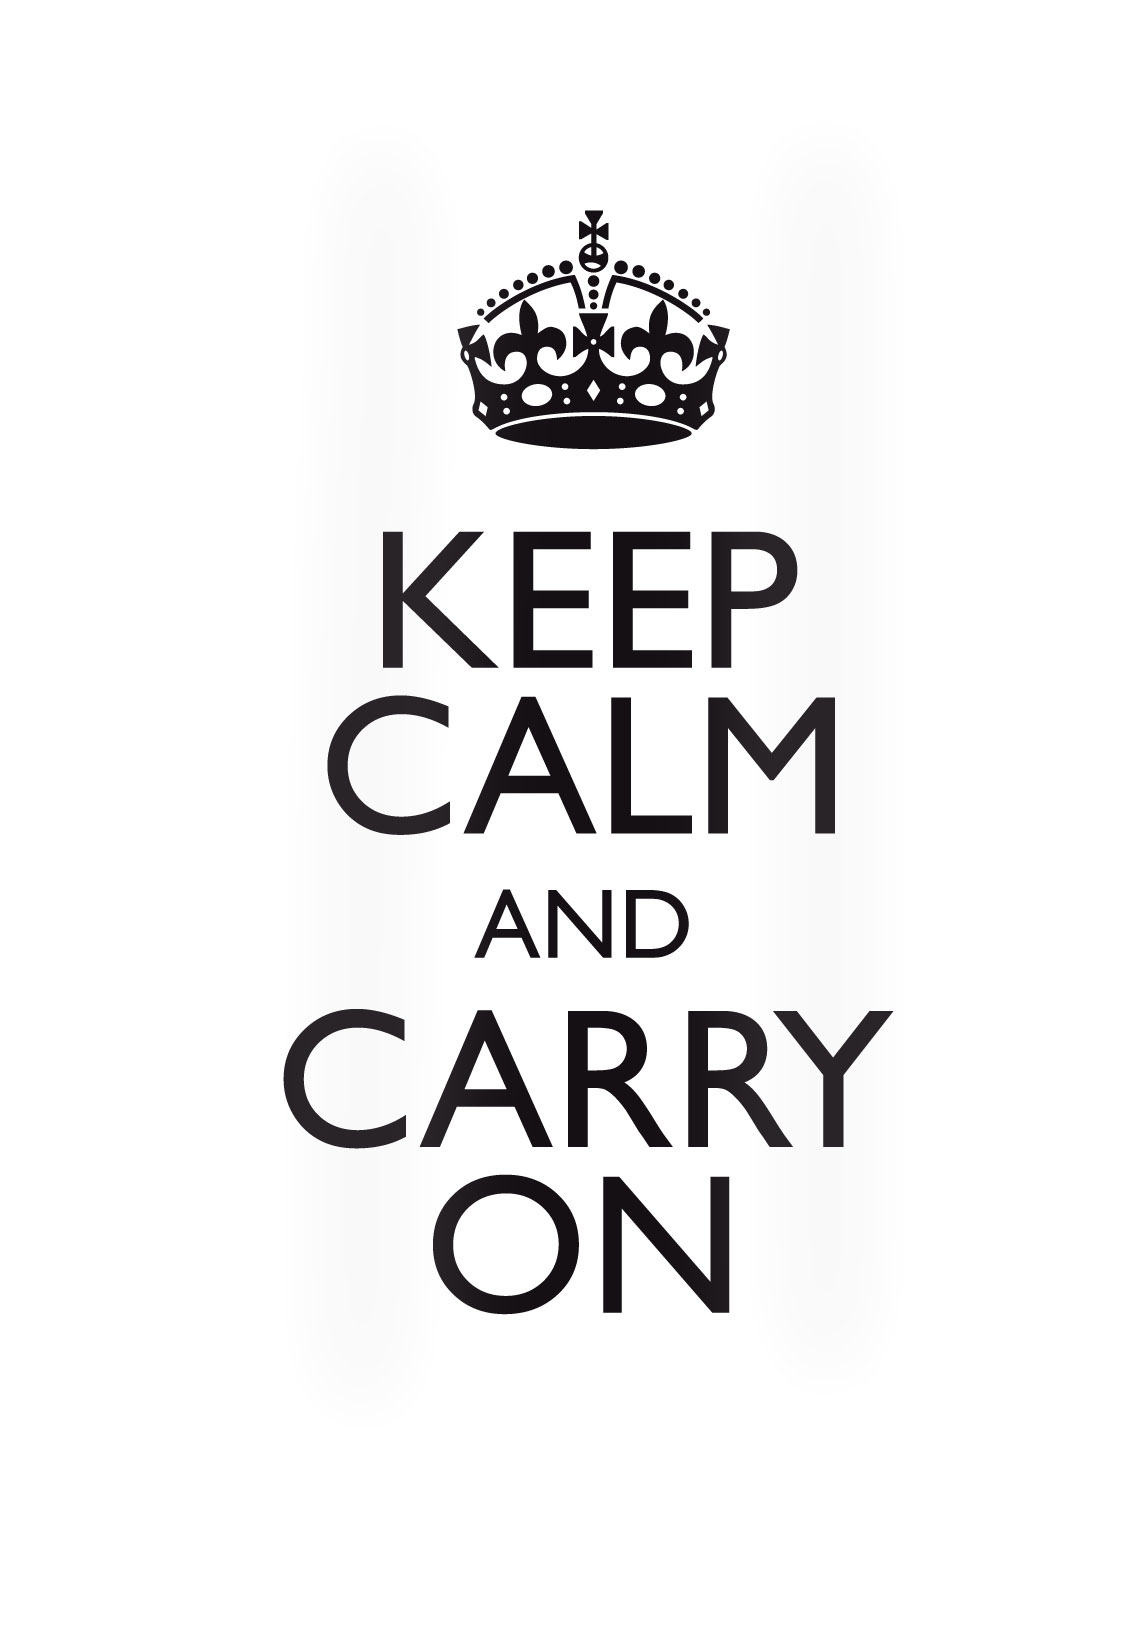 keep-calm-and-carry-on-clipart-free-image-download